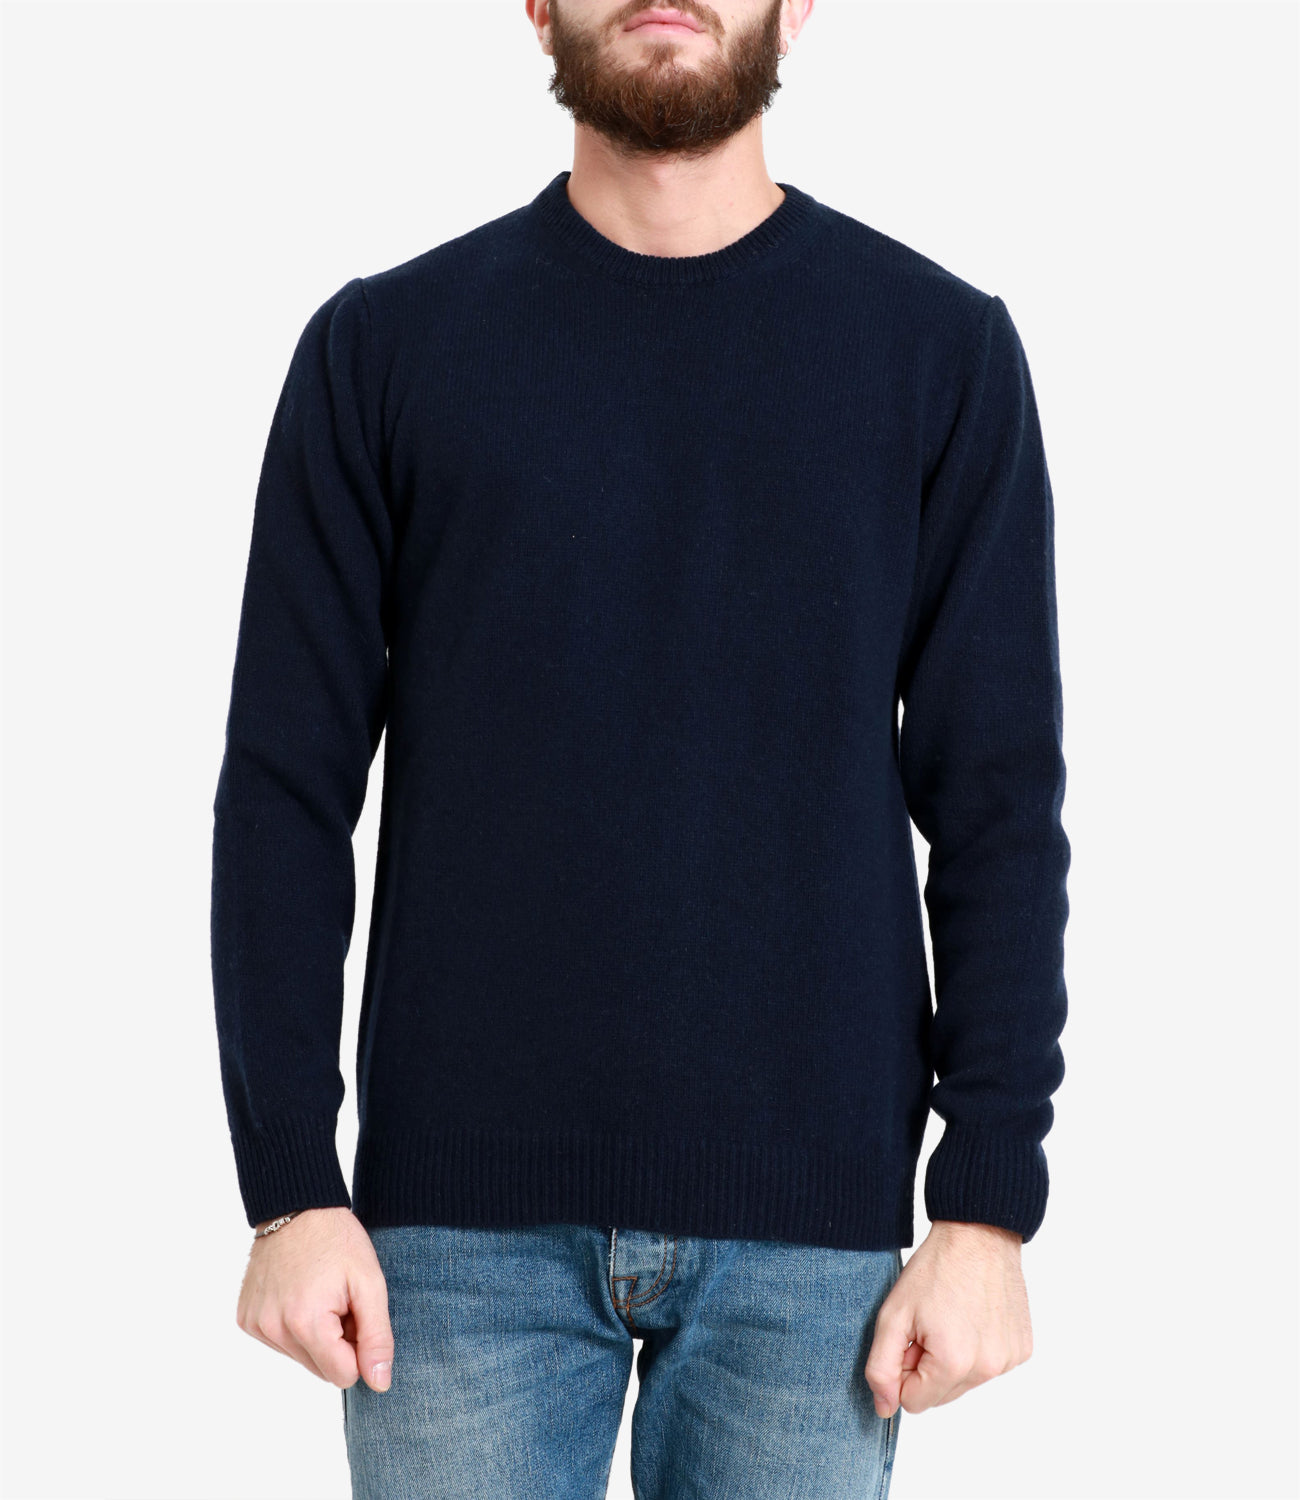 King Cashmere | Navy Blue Sweater